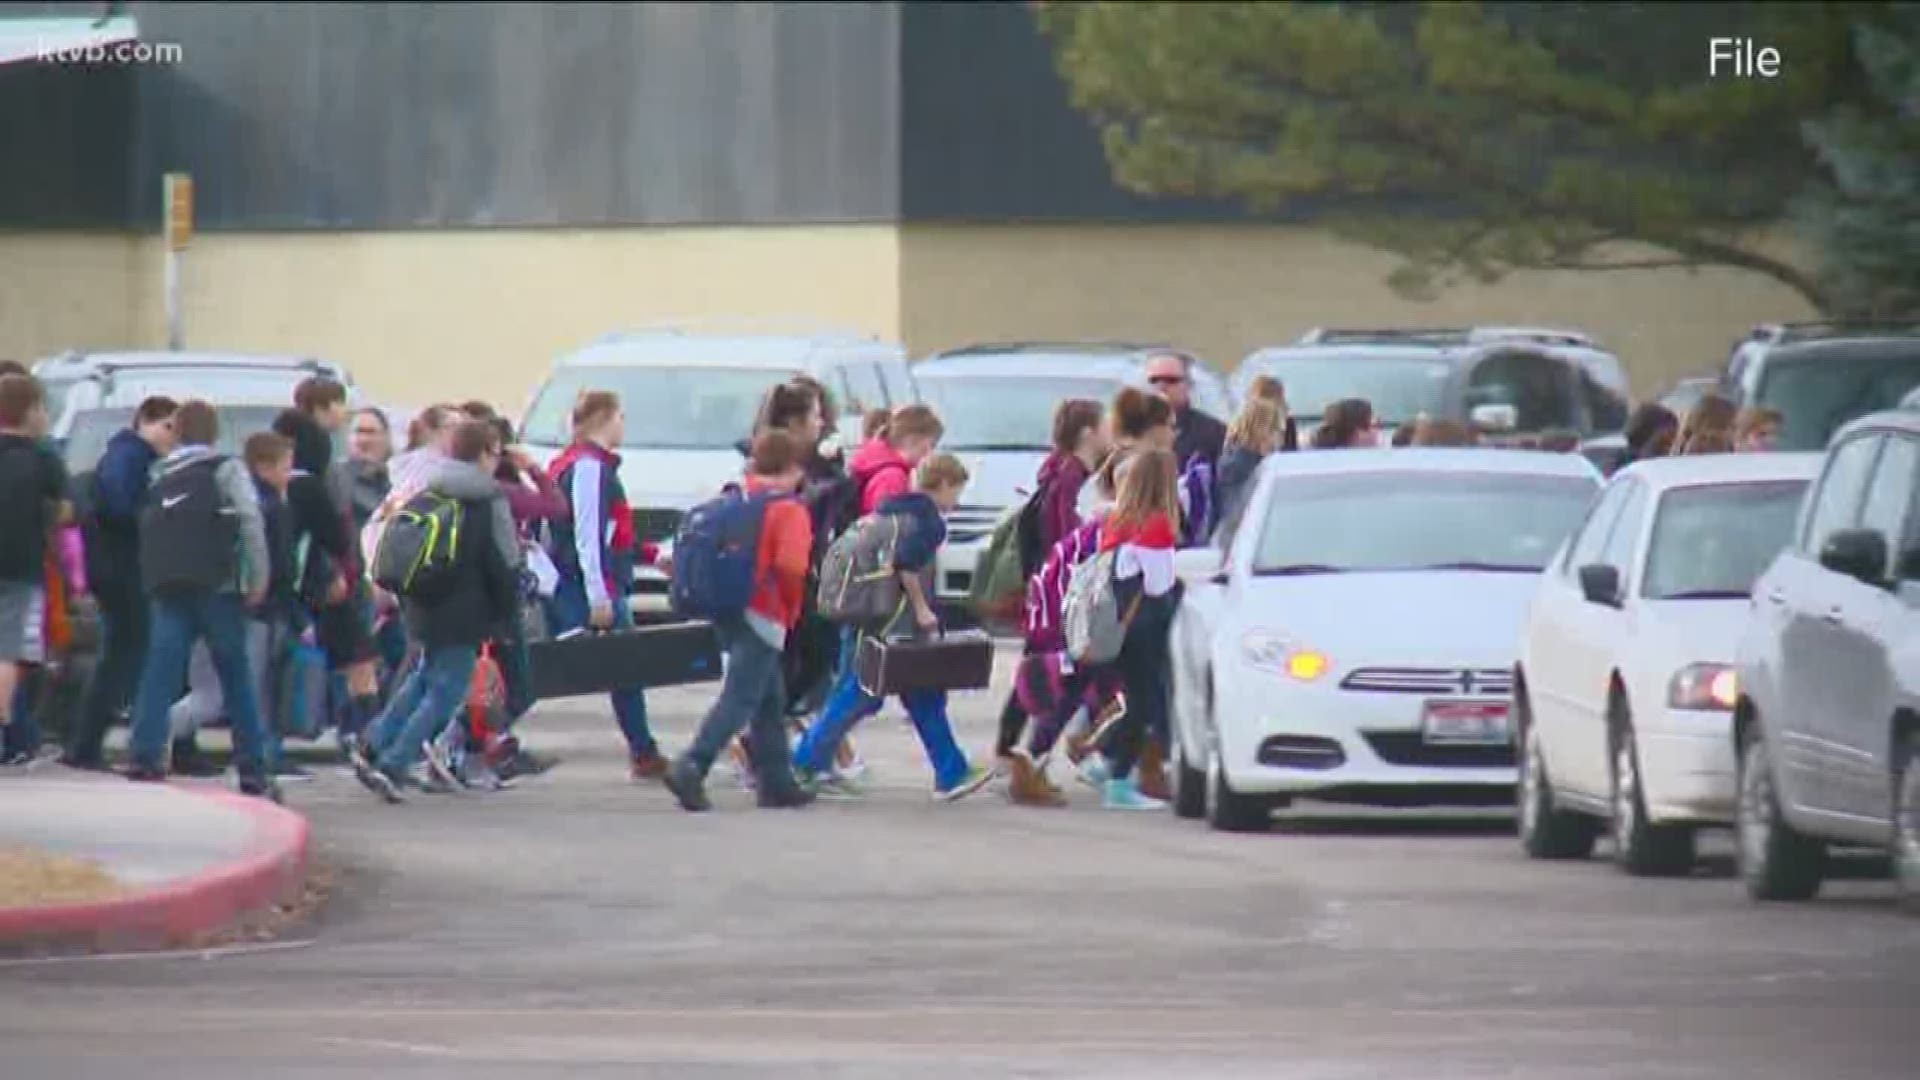 Several Treasure Valley teachers spoke with KTVB about some of the challenges they expect to face when students return to the classroom.